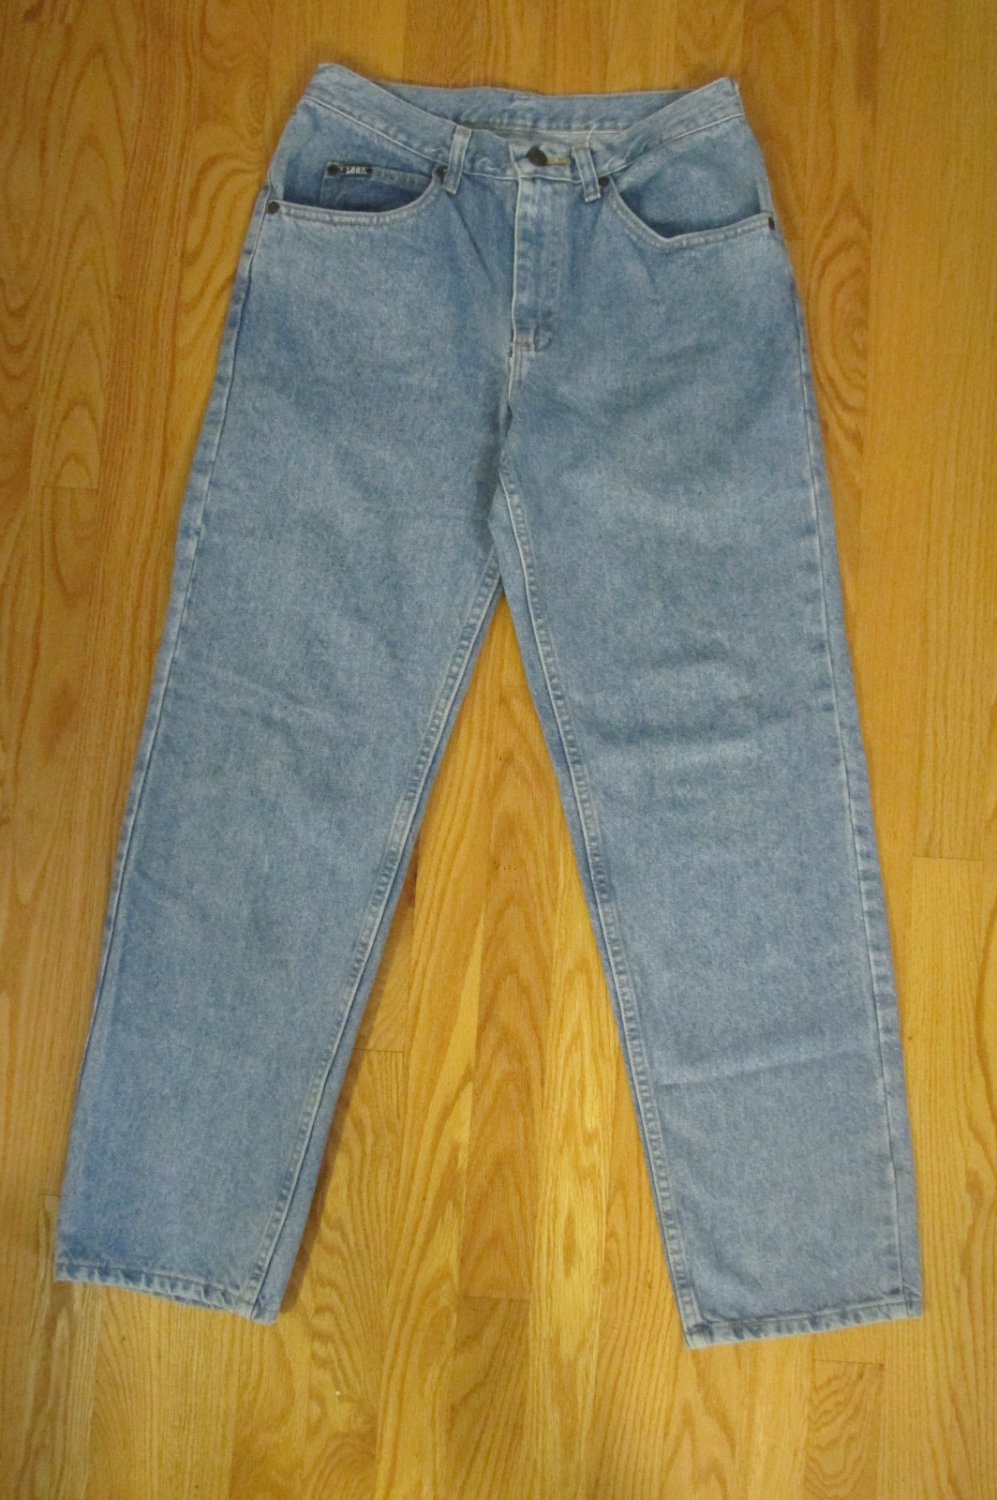 LEE 1889 MEN'S SIZE 29 X 29 1/2 JEANS LIGHT BLUE STONE WASHED 80'S ...